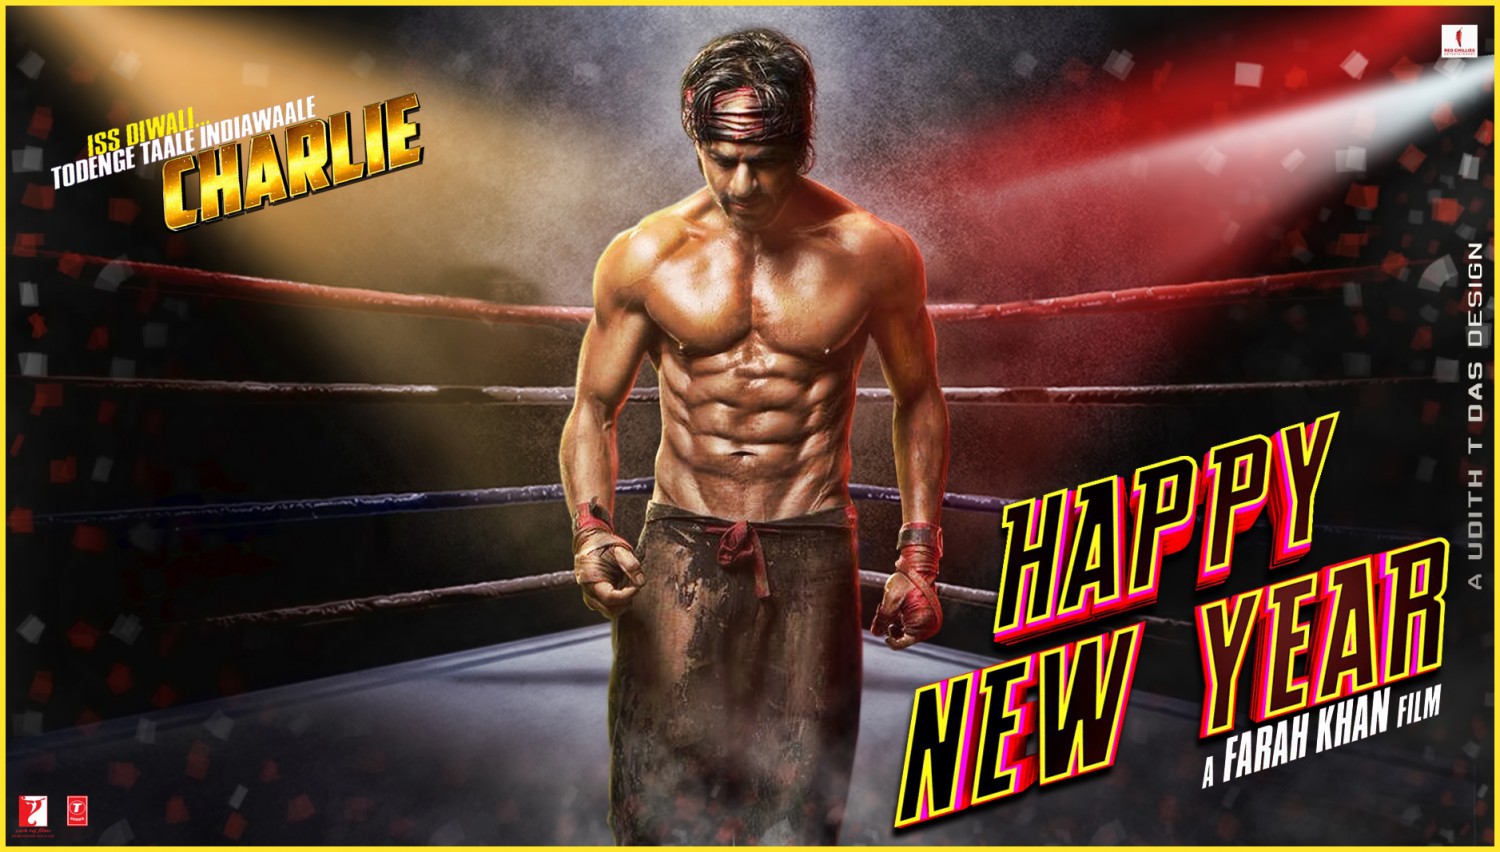 Extra Large Movie Poster Image for Happy New Year (#2 of 2)